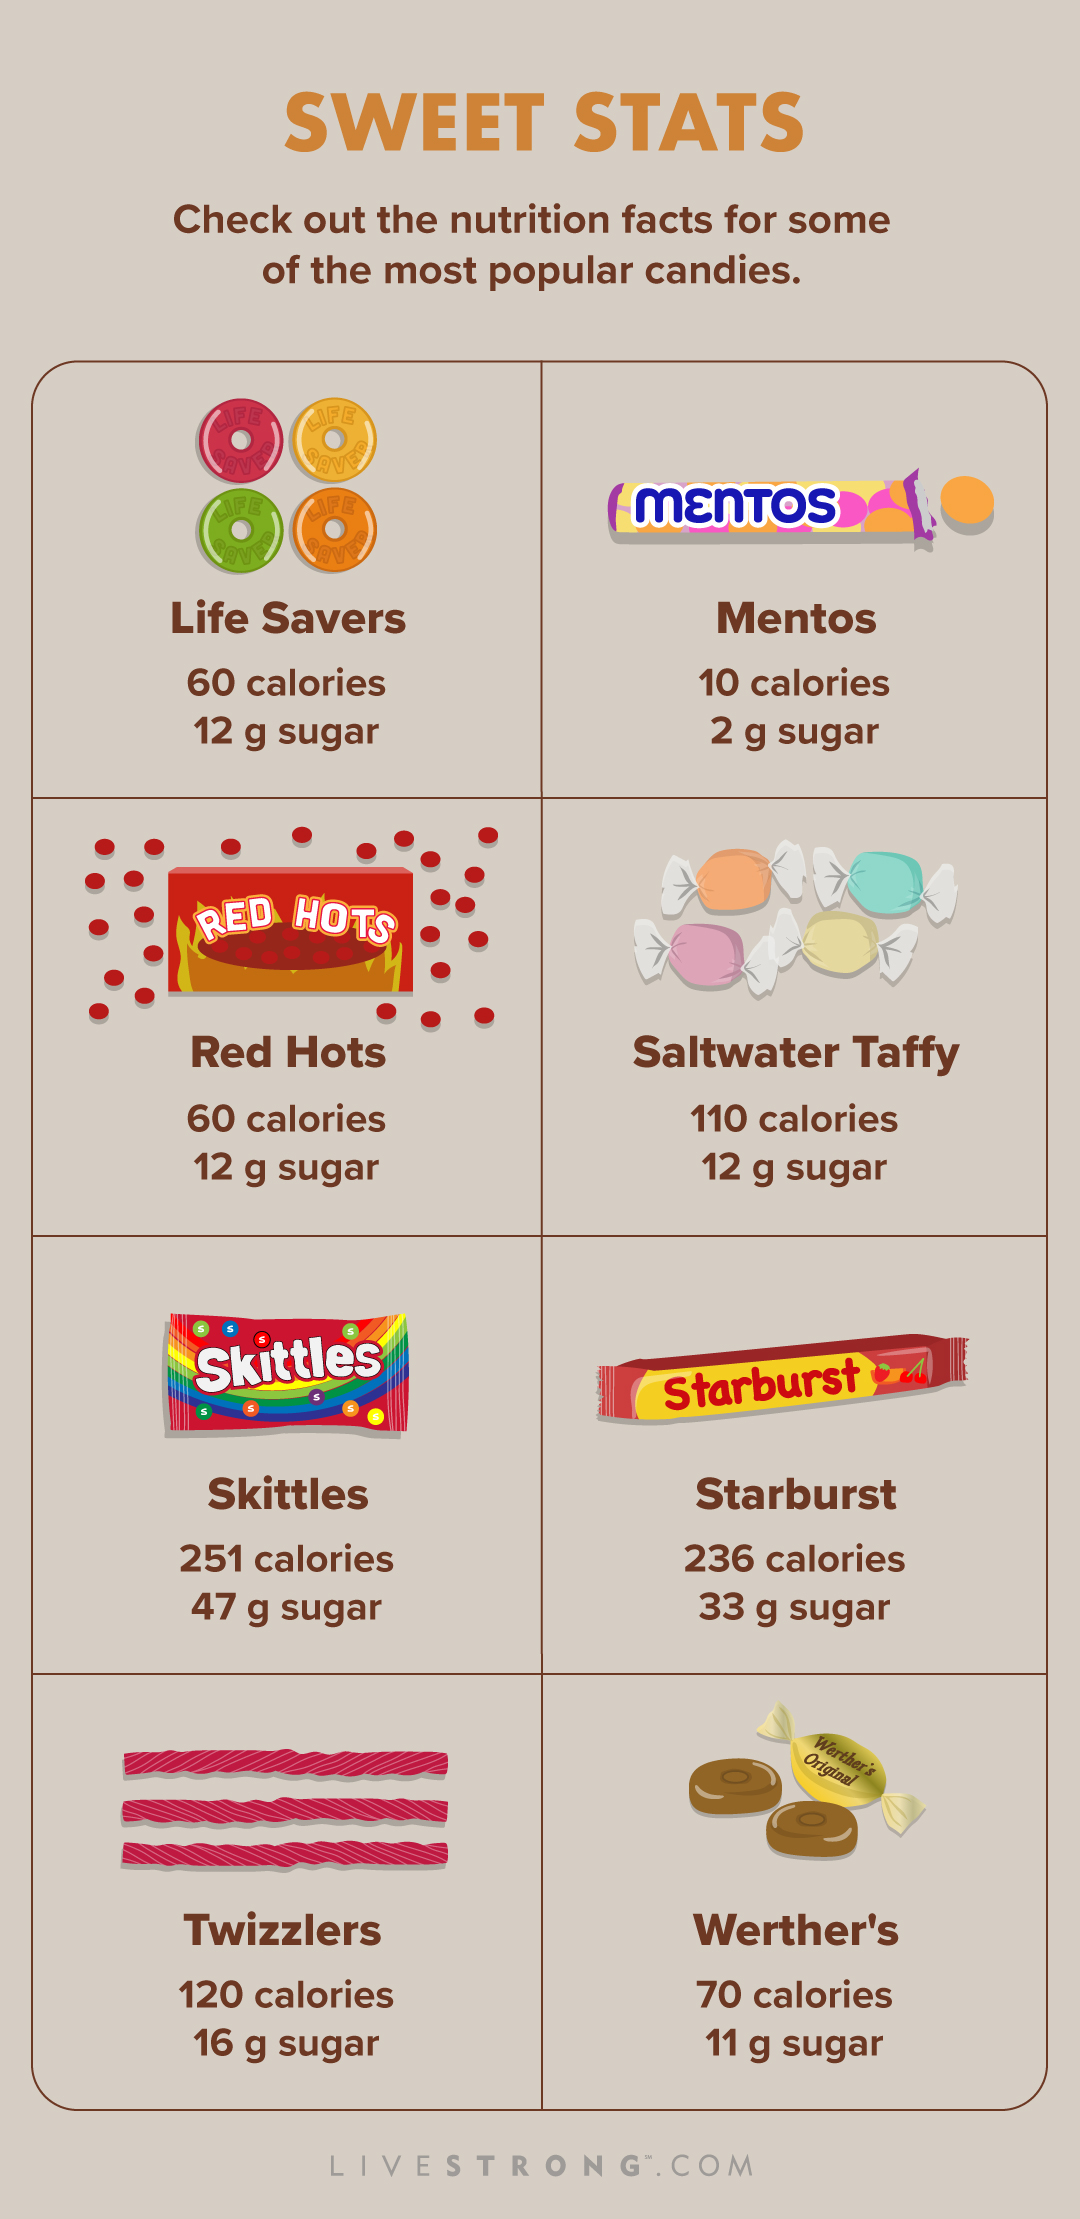 Top 5 candies with the most calories and sugar